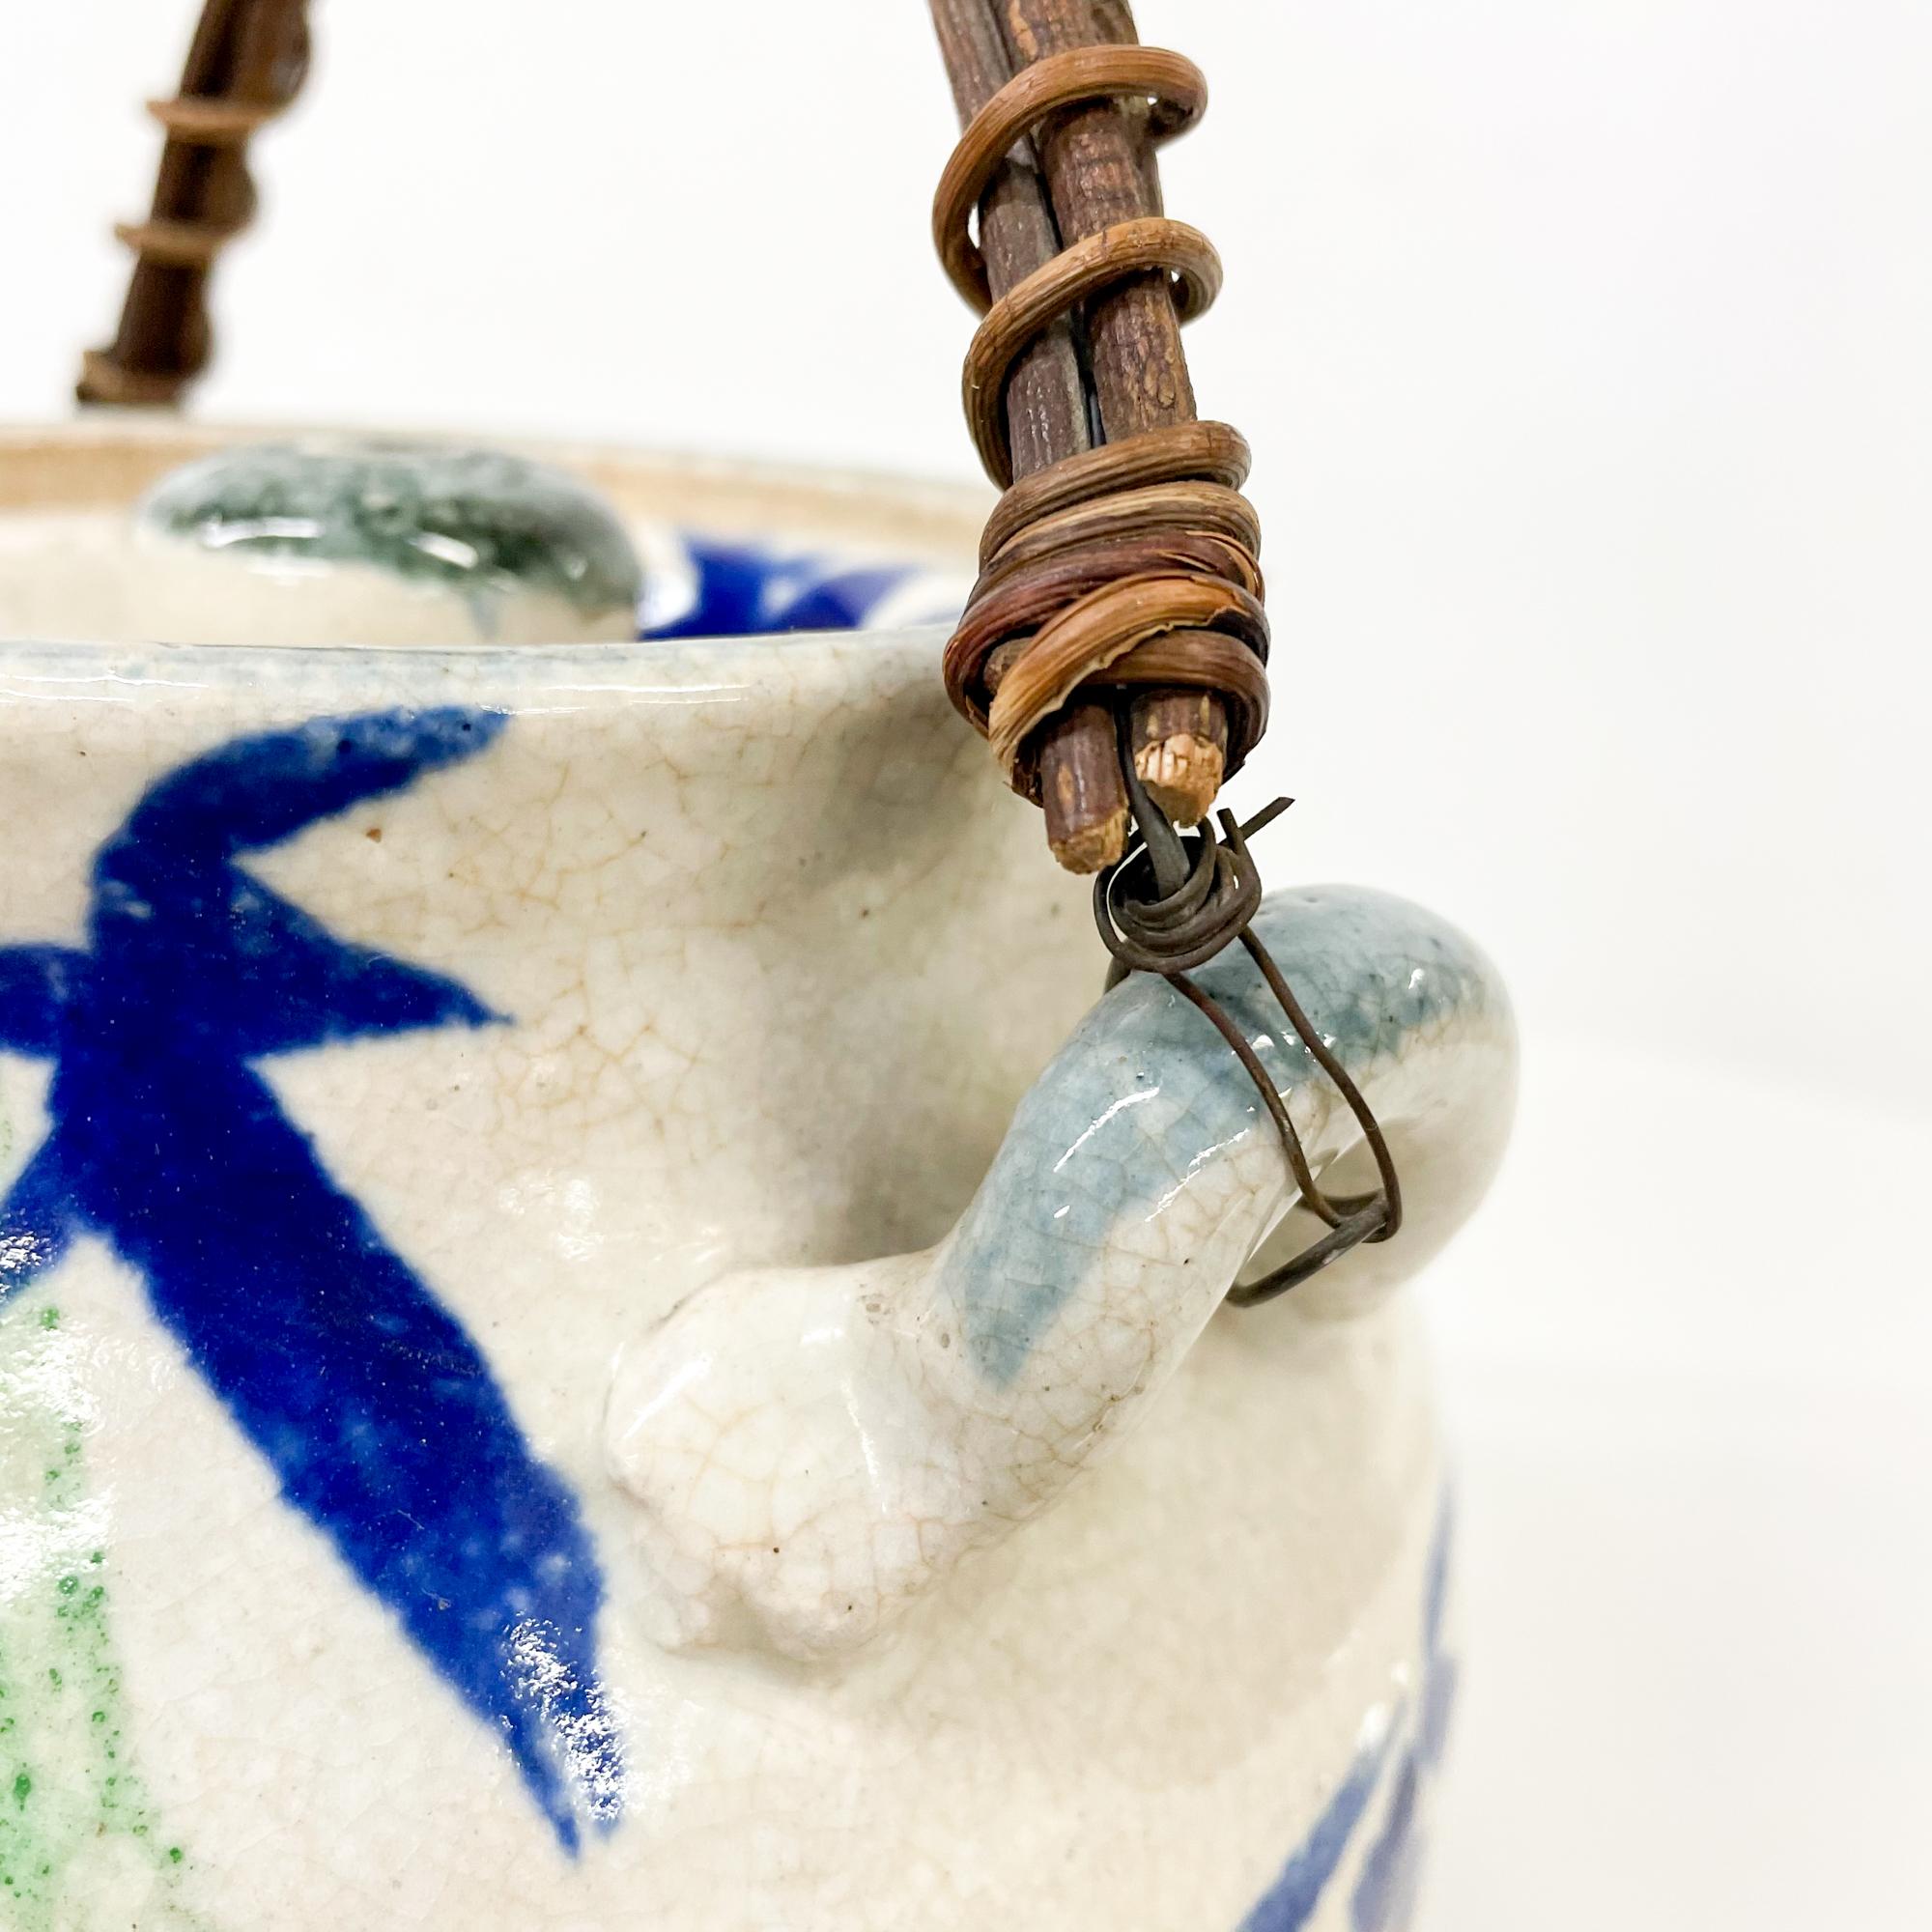 Anglo-Japanese 1970s Modern Japanese Pottery Blue White Tea Pot Hand Decorated Cane Handle